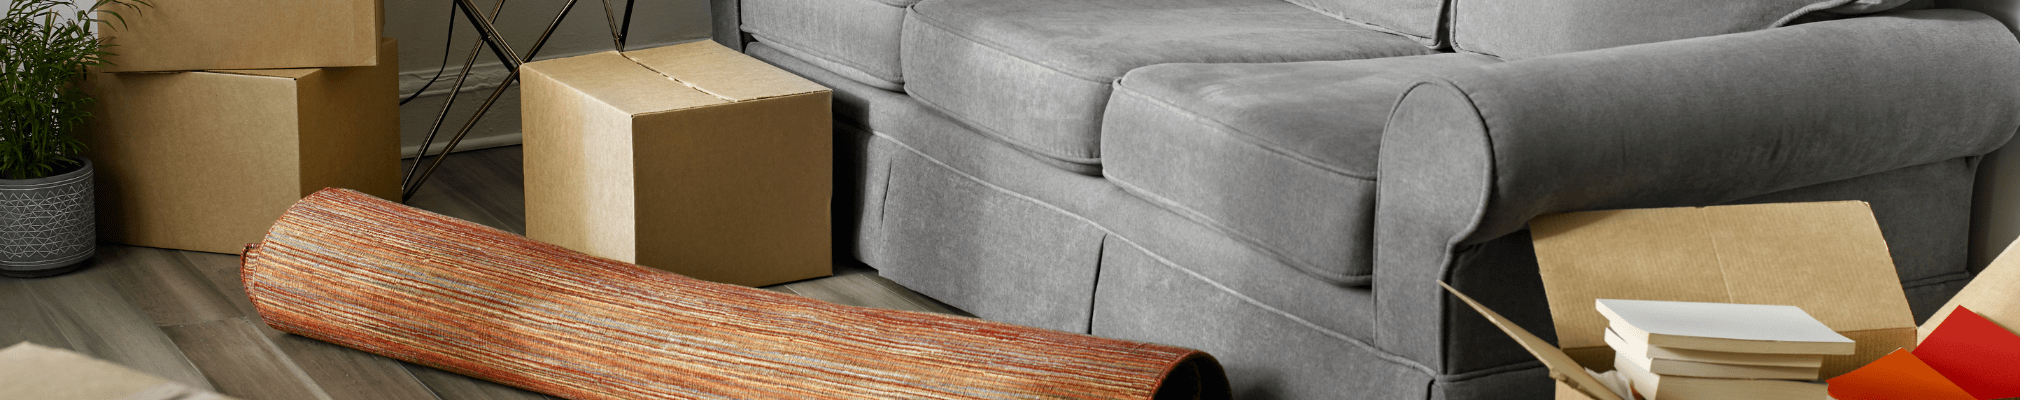 Sofa and packing boxes. Start your property search on Share to Buy!